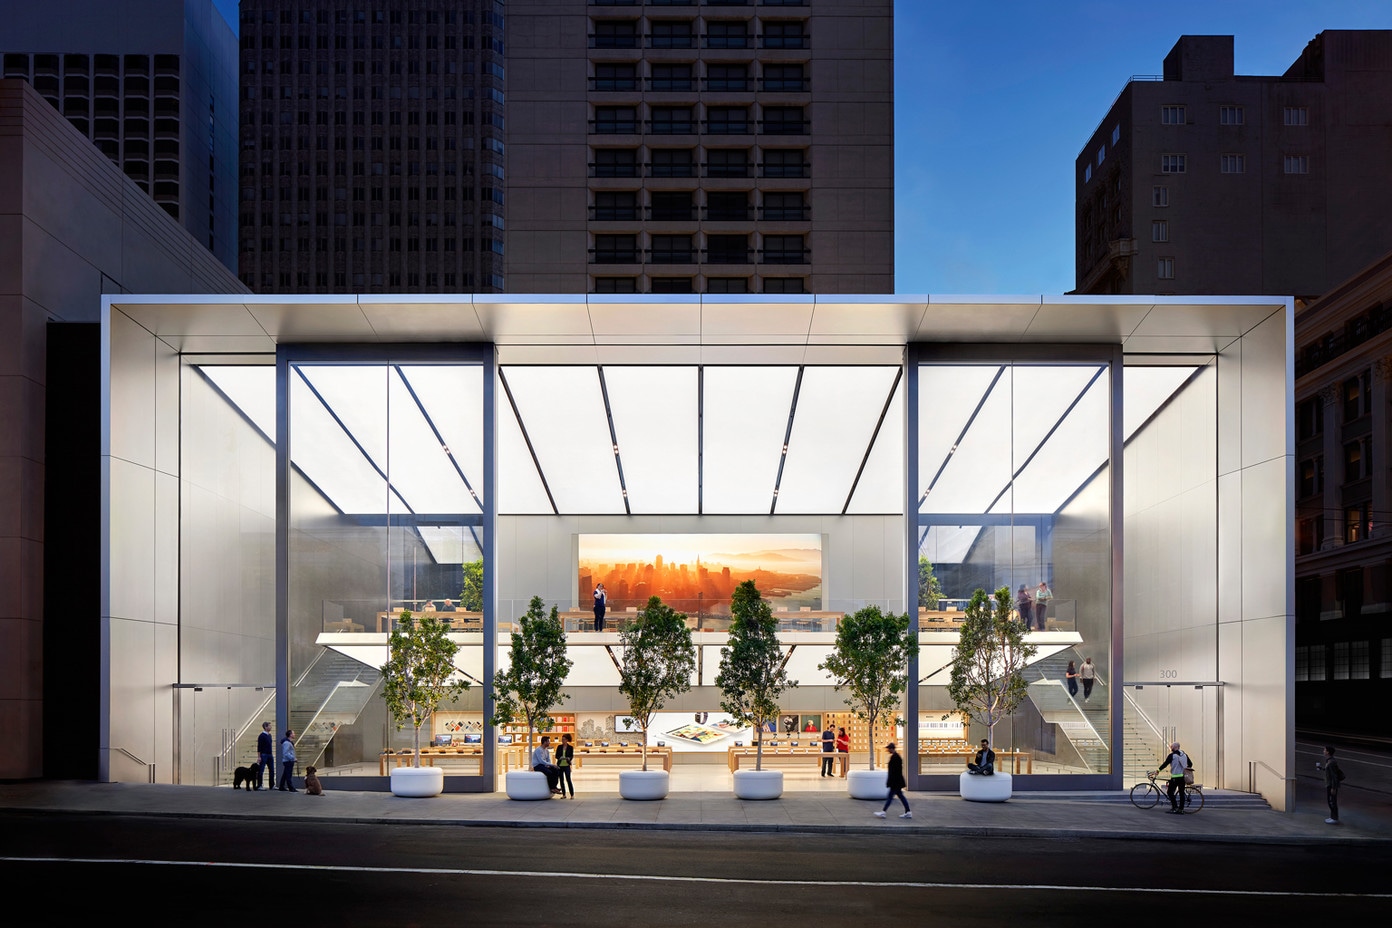 Backstage story: some fun facts about Apple Union Square and store employees